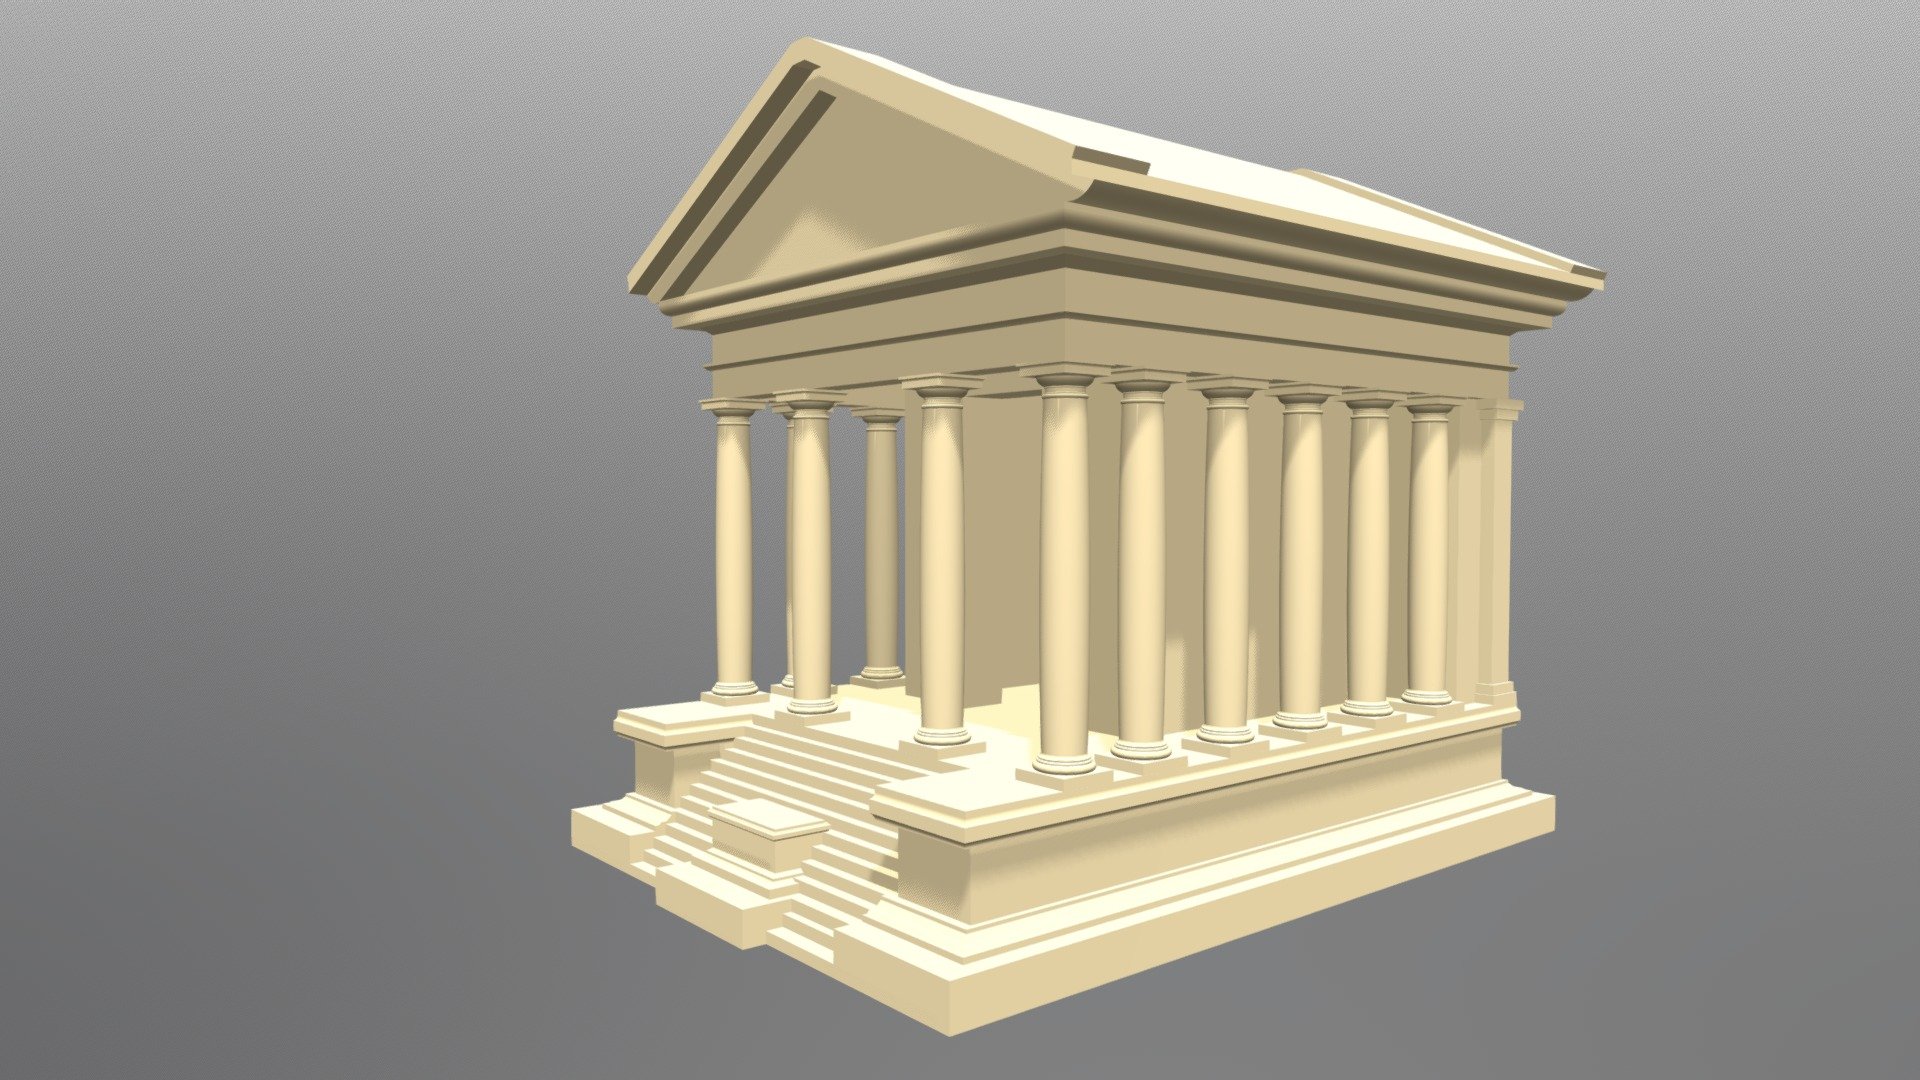 Podium temple, peripteros sine postico (colonnade with no columns along the back wall) with Tuscan columns &amp; an altar built into the stairs.

Made with SketchUp, not modelled on any particular building 3d model